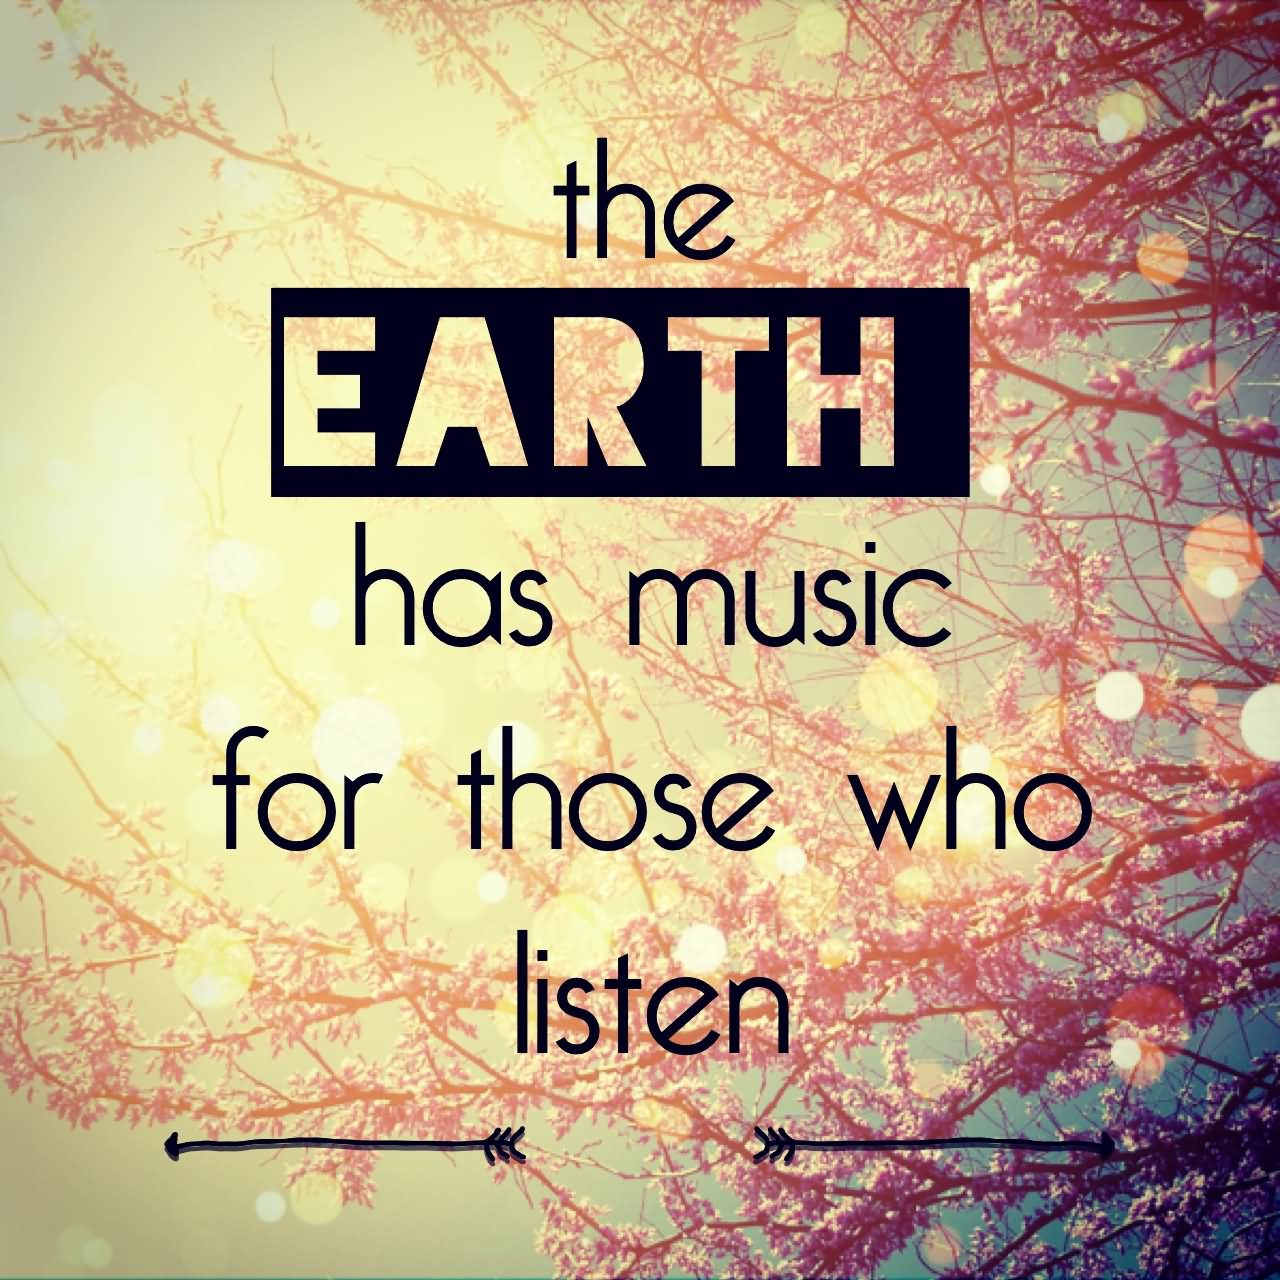 The earth has music for those who listen - Earth Quotes